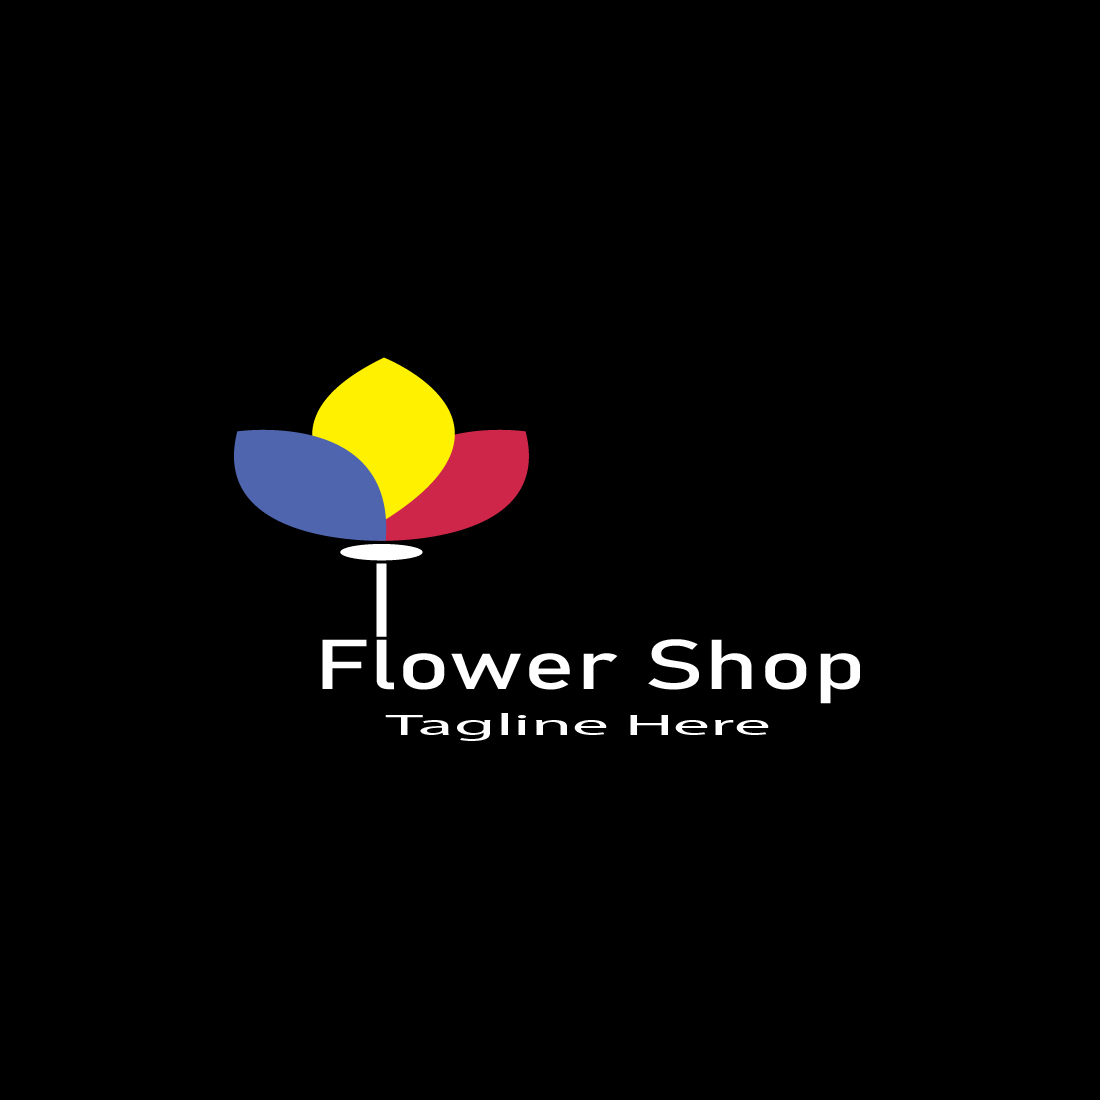 Flower Shop Logo preview with black background.